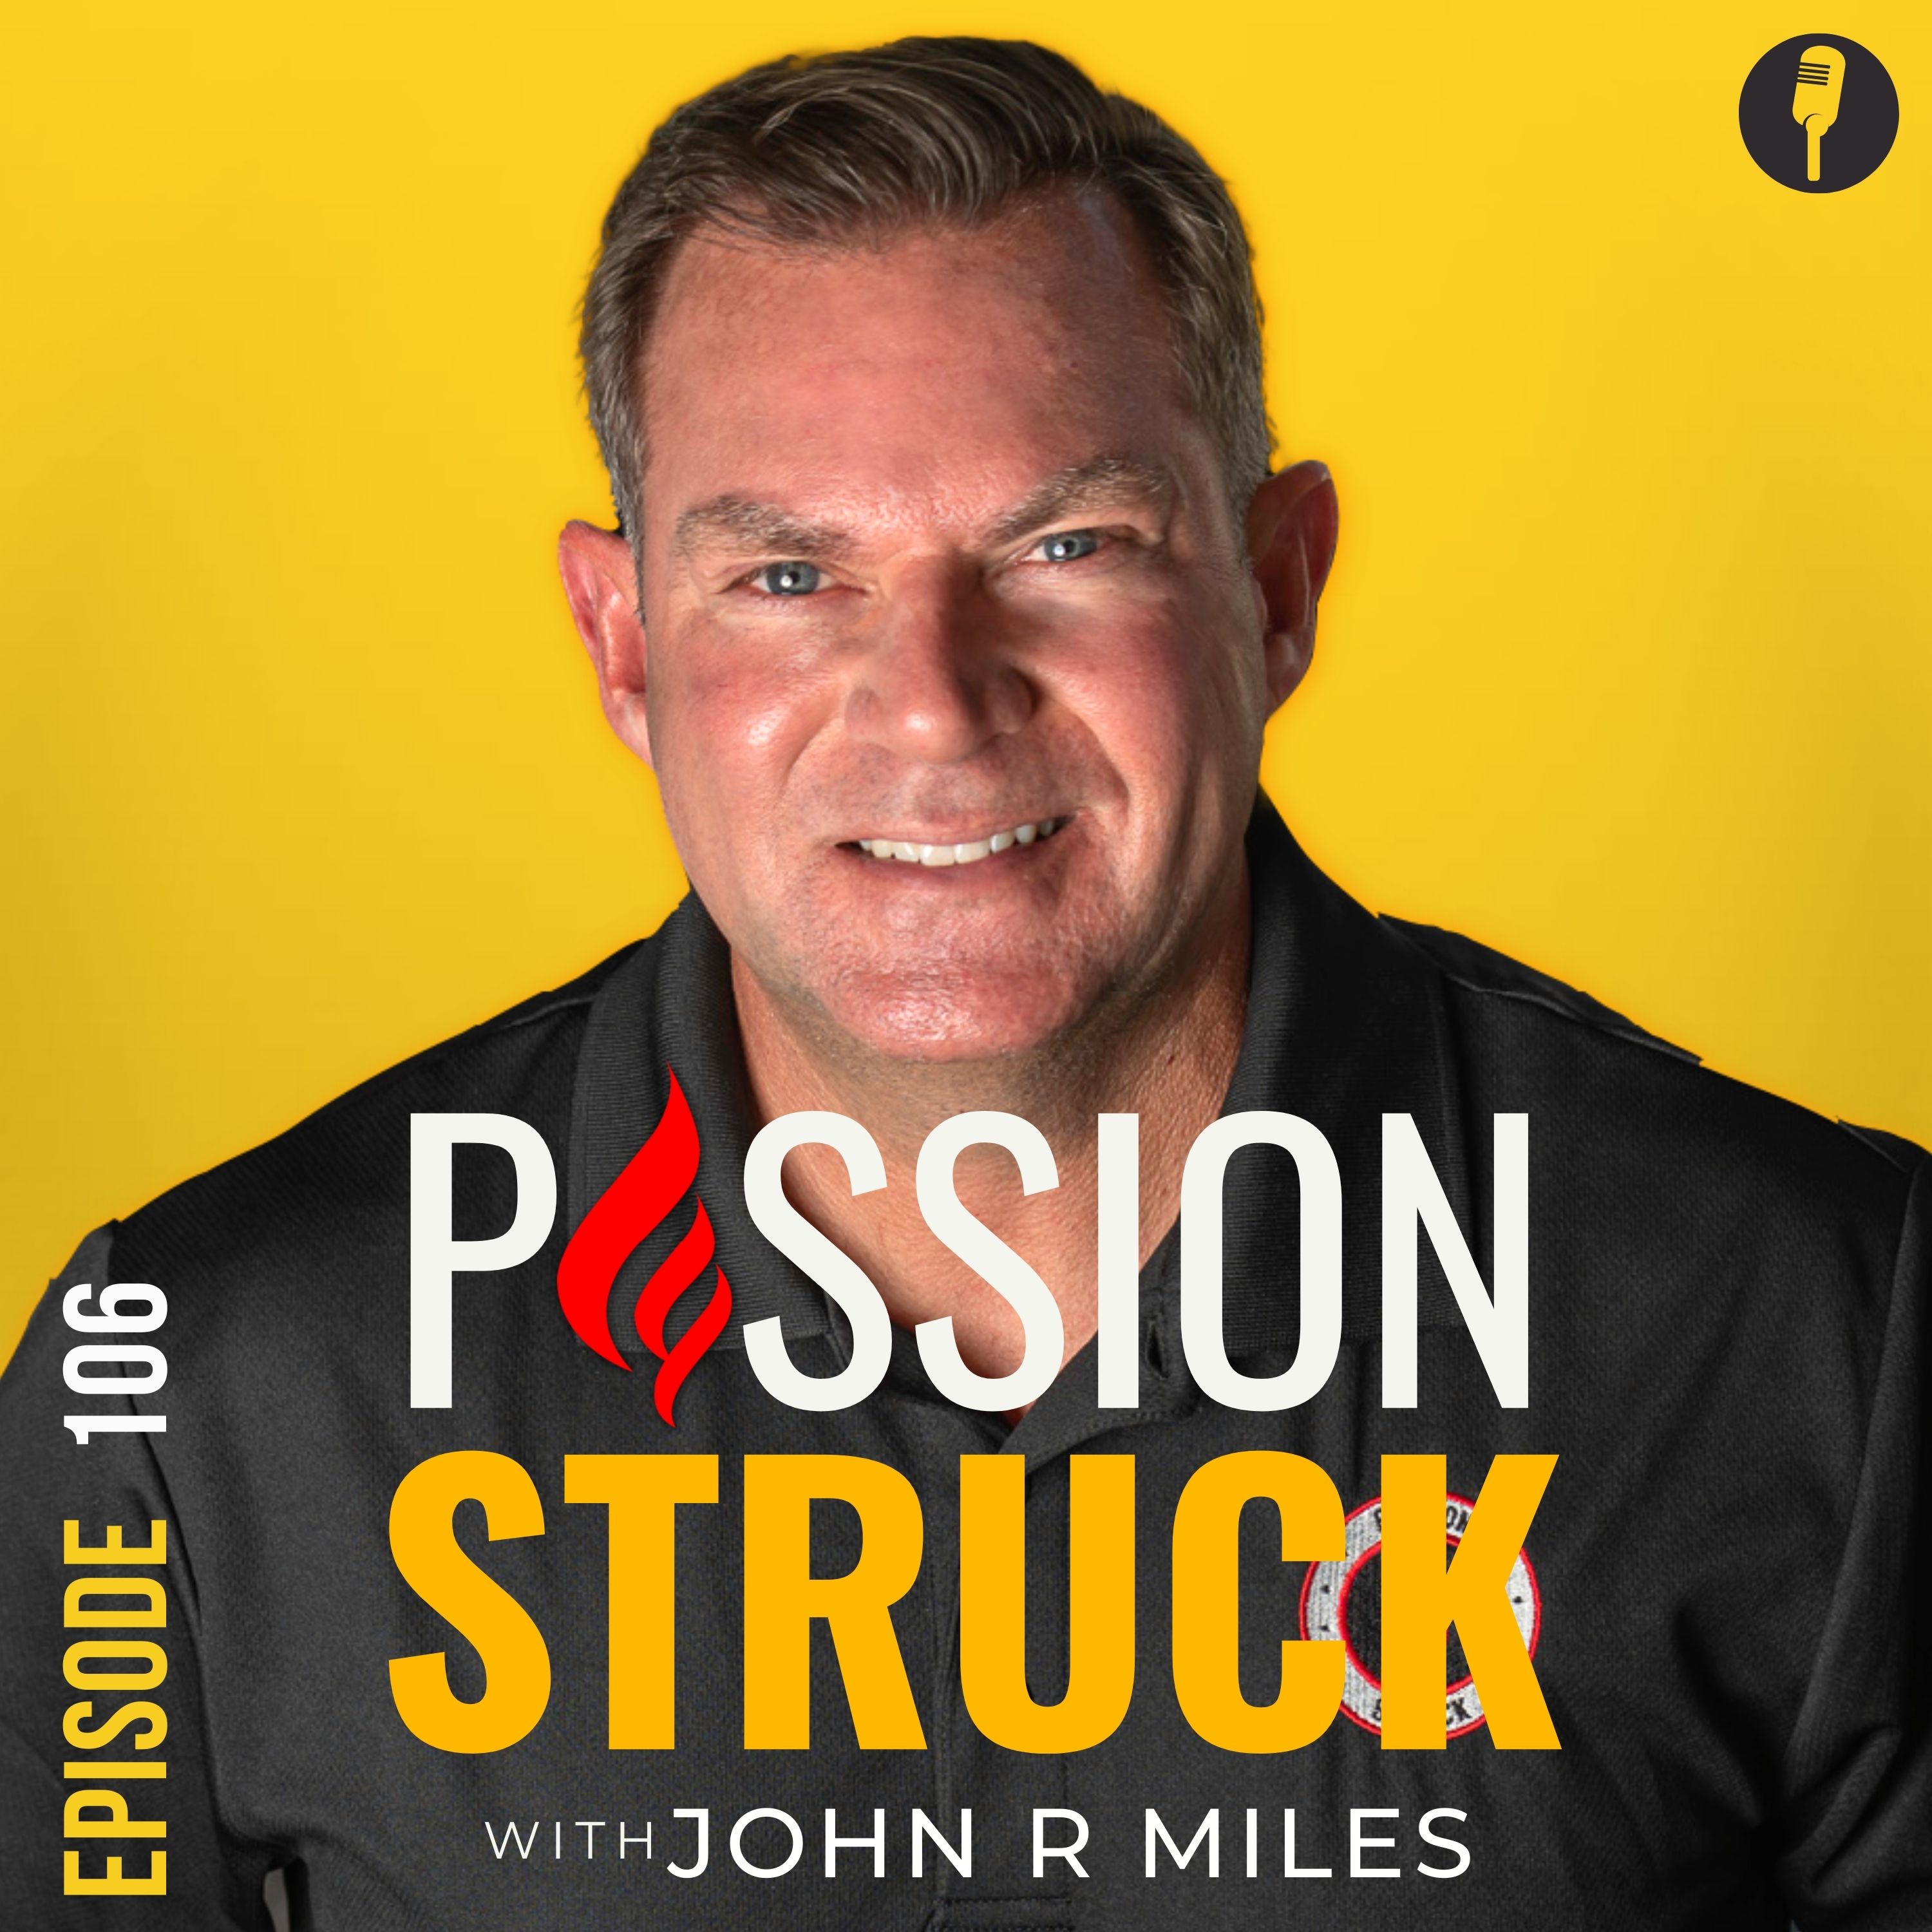 Passion Struck Podcast cover featuring John R. Miles episode 106 focused on joy as your compass